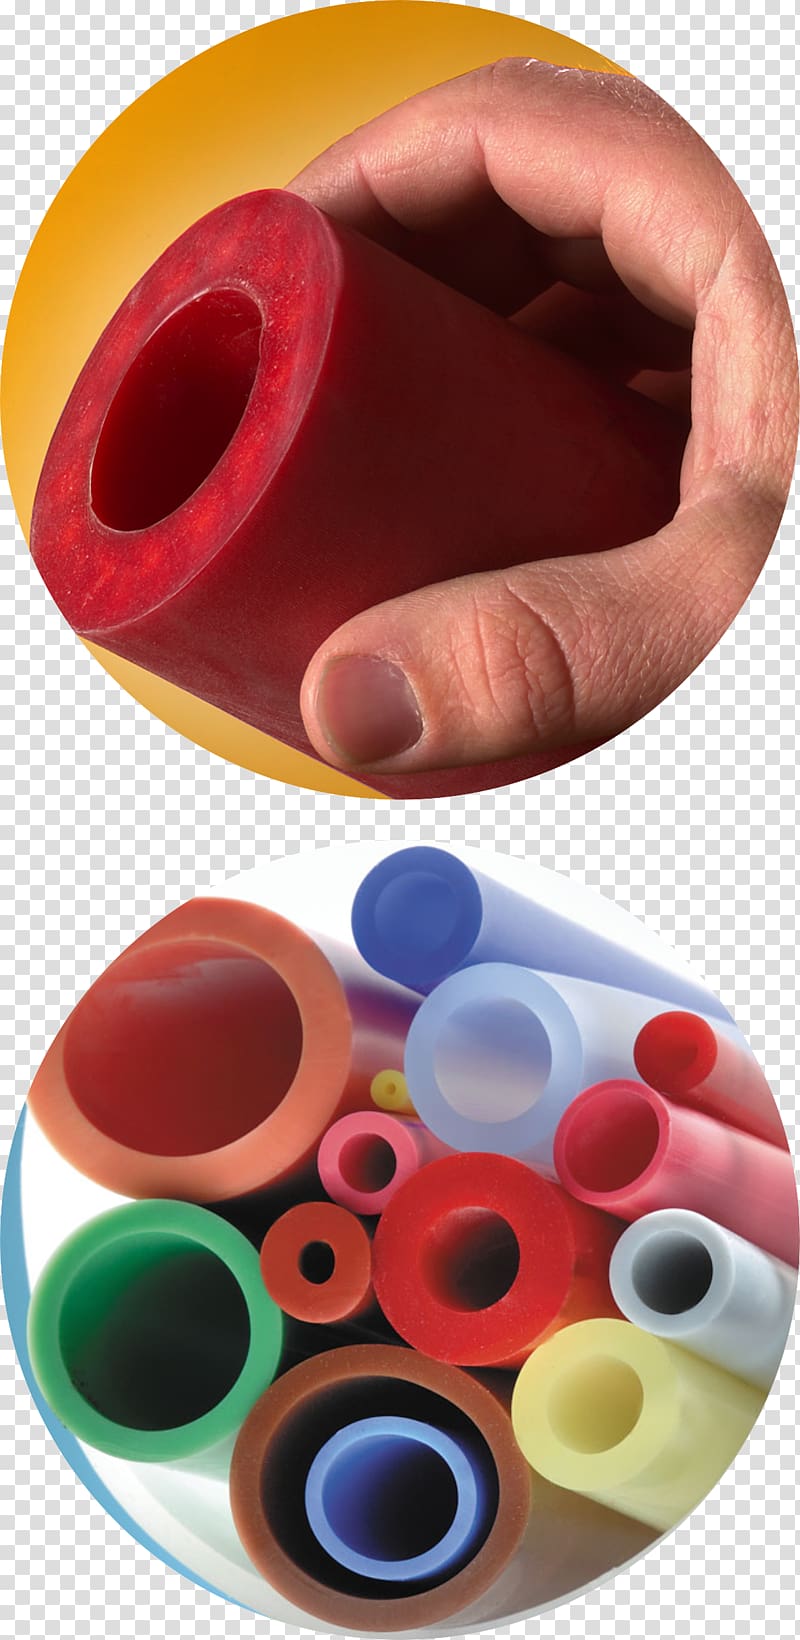 Plastic Silicone rubber Hose Tube, rubber products transparent background PNG clipart